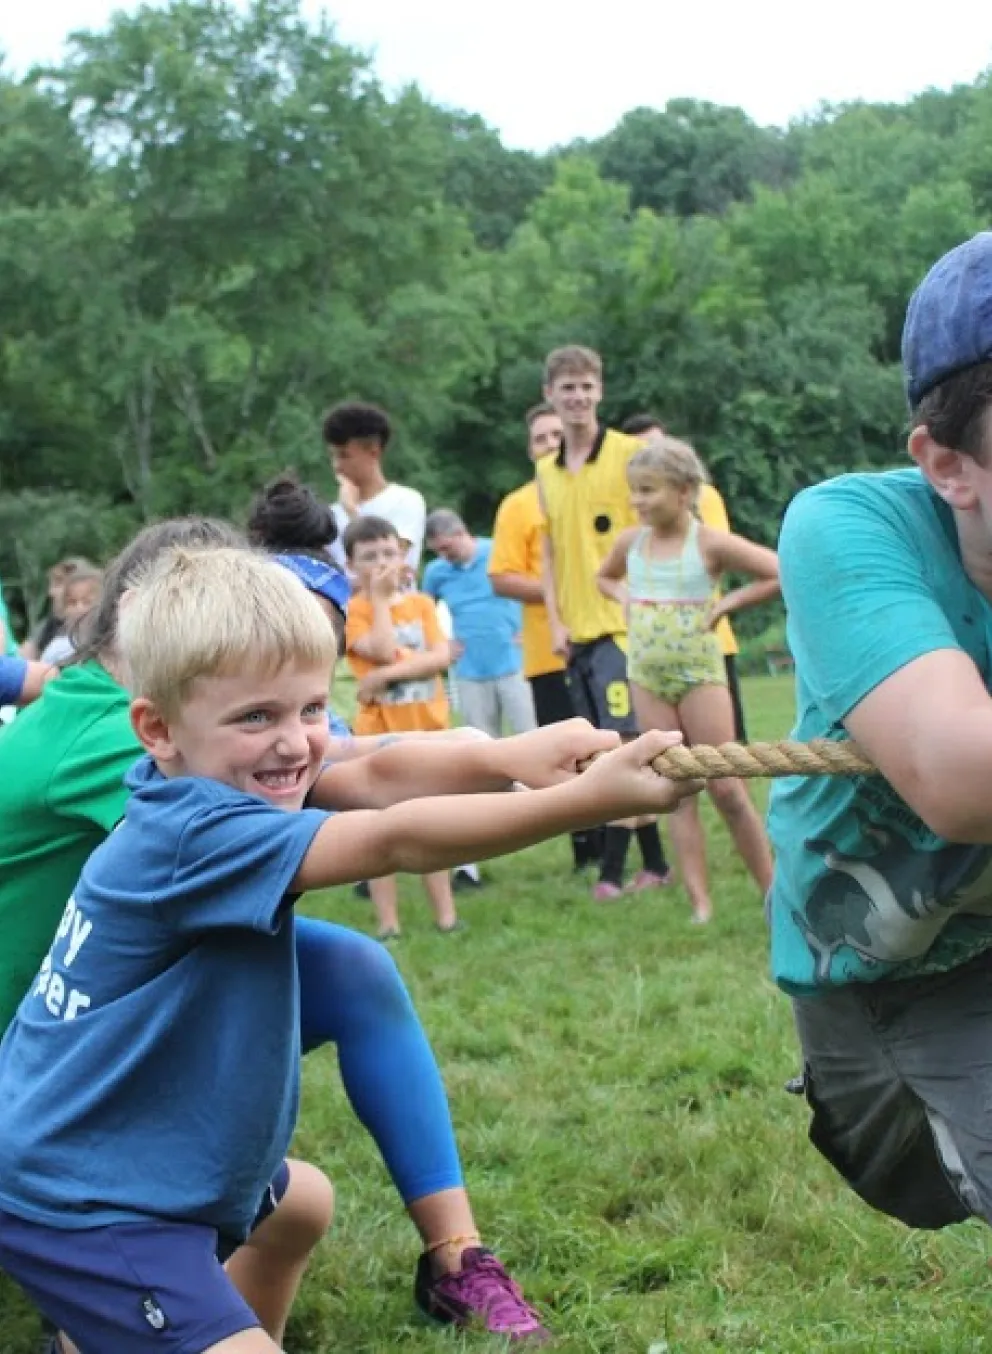 A group of children compete in tug of war, and one boy in the front grits his teeth while laughing.